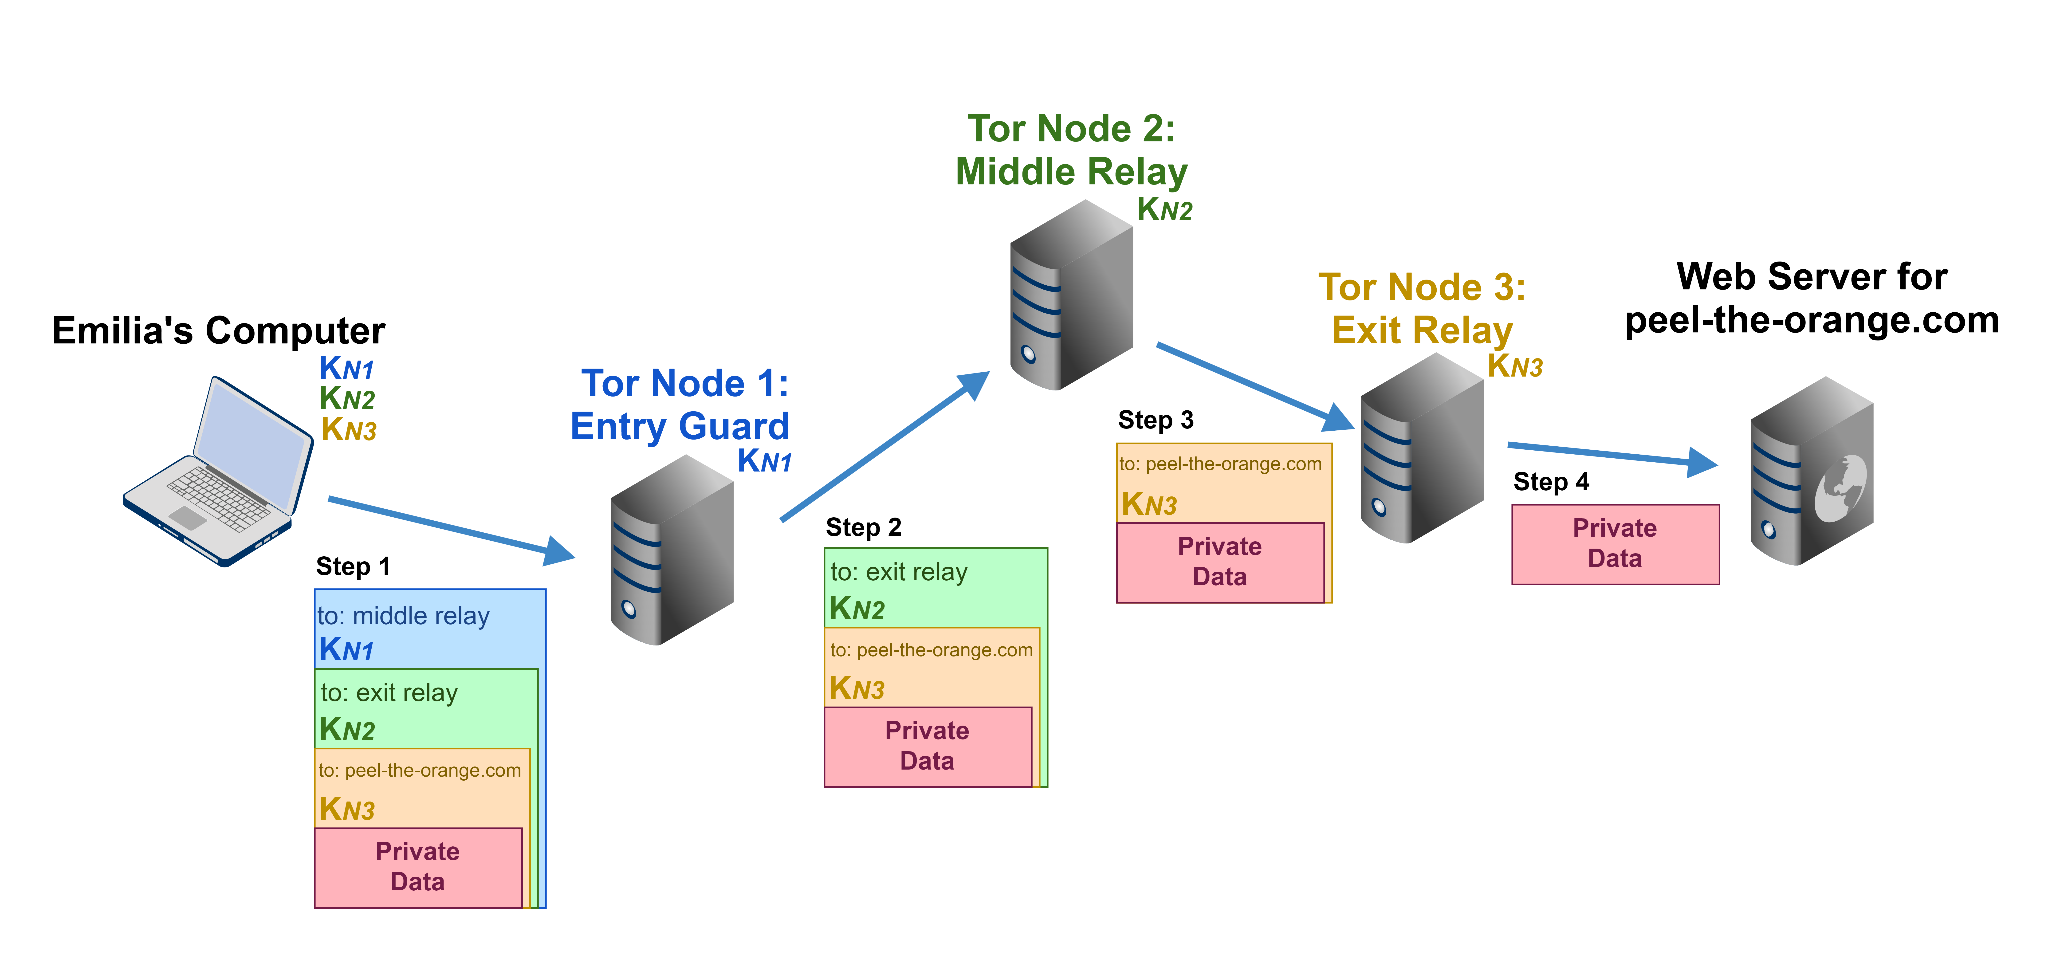 Principle diagram of the network of Tor nodes